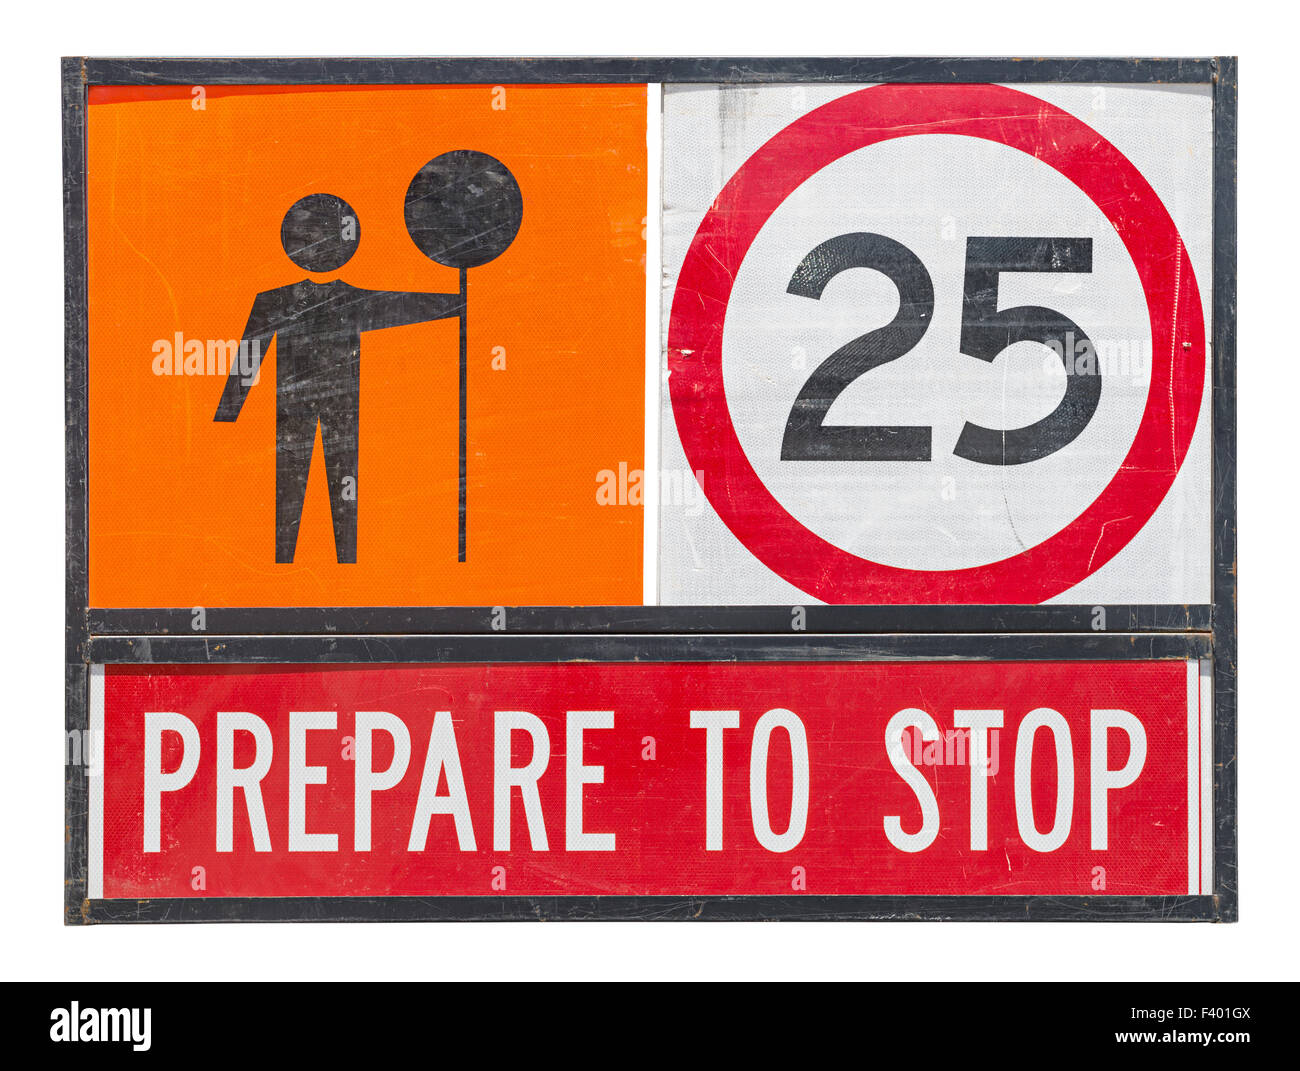 old prepare to stop traffic sign Stock Photo